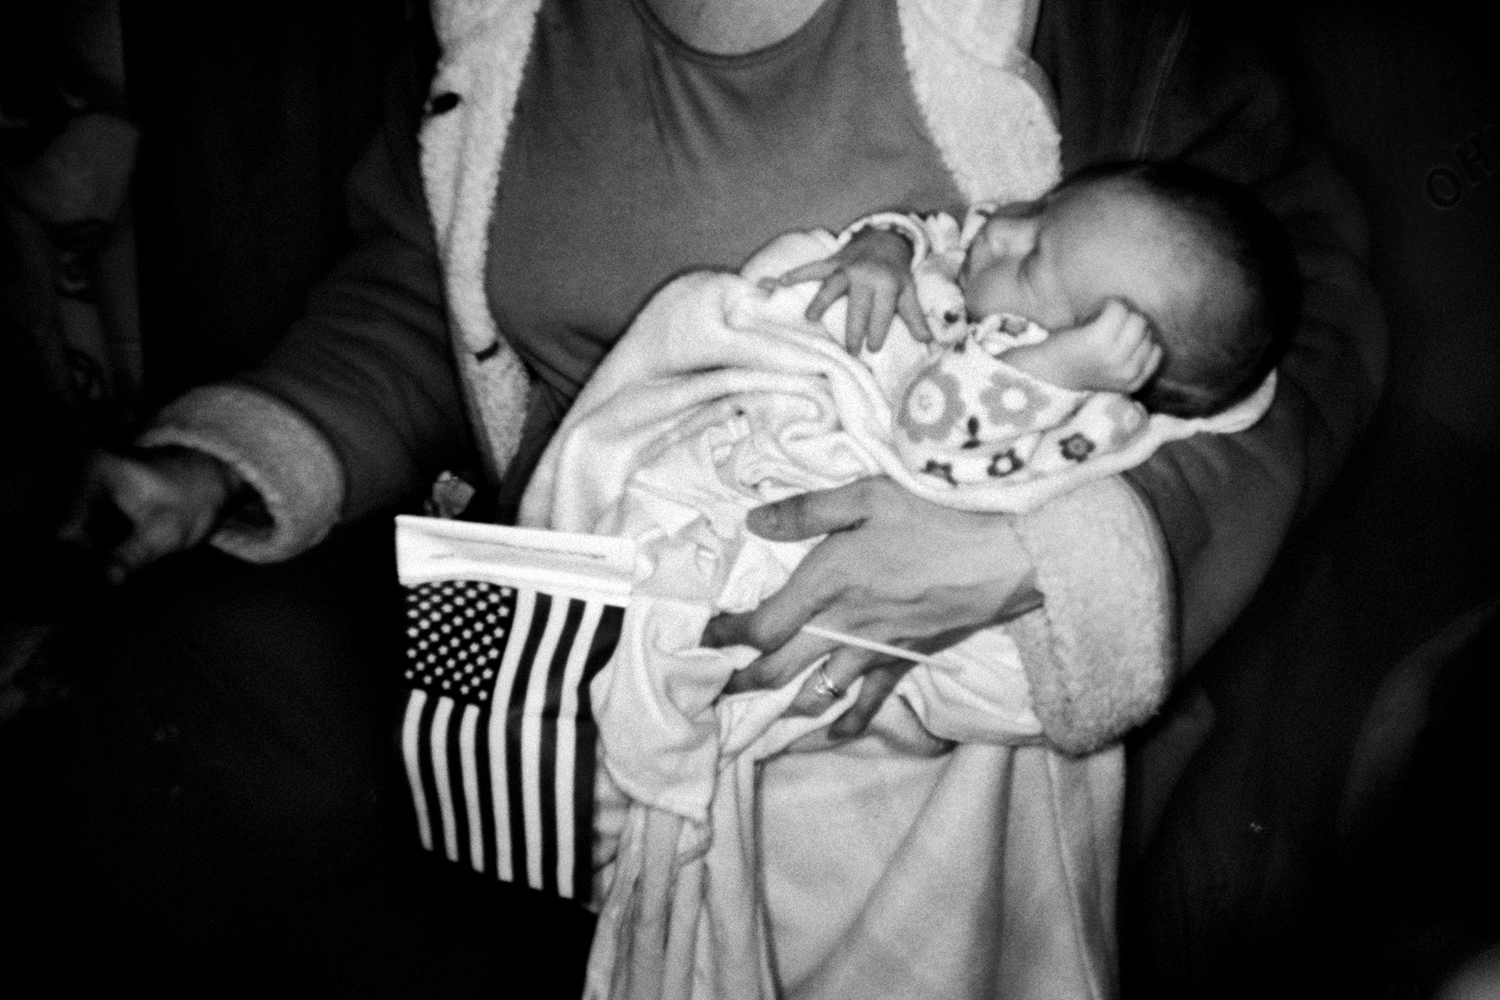 March 5, 2012. Amy Carney holds her 3-week-old daughter Anna during a rally at the American Legion in Westerville, Ohio.